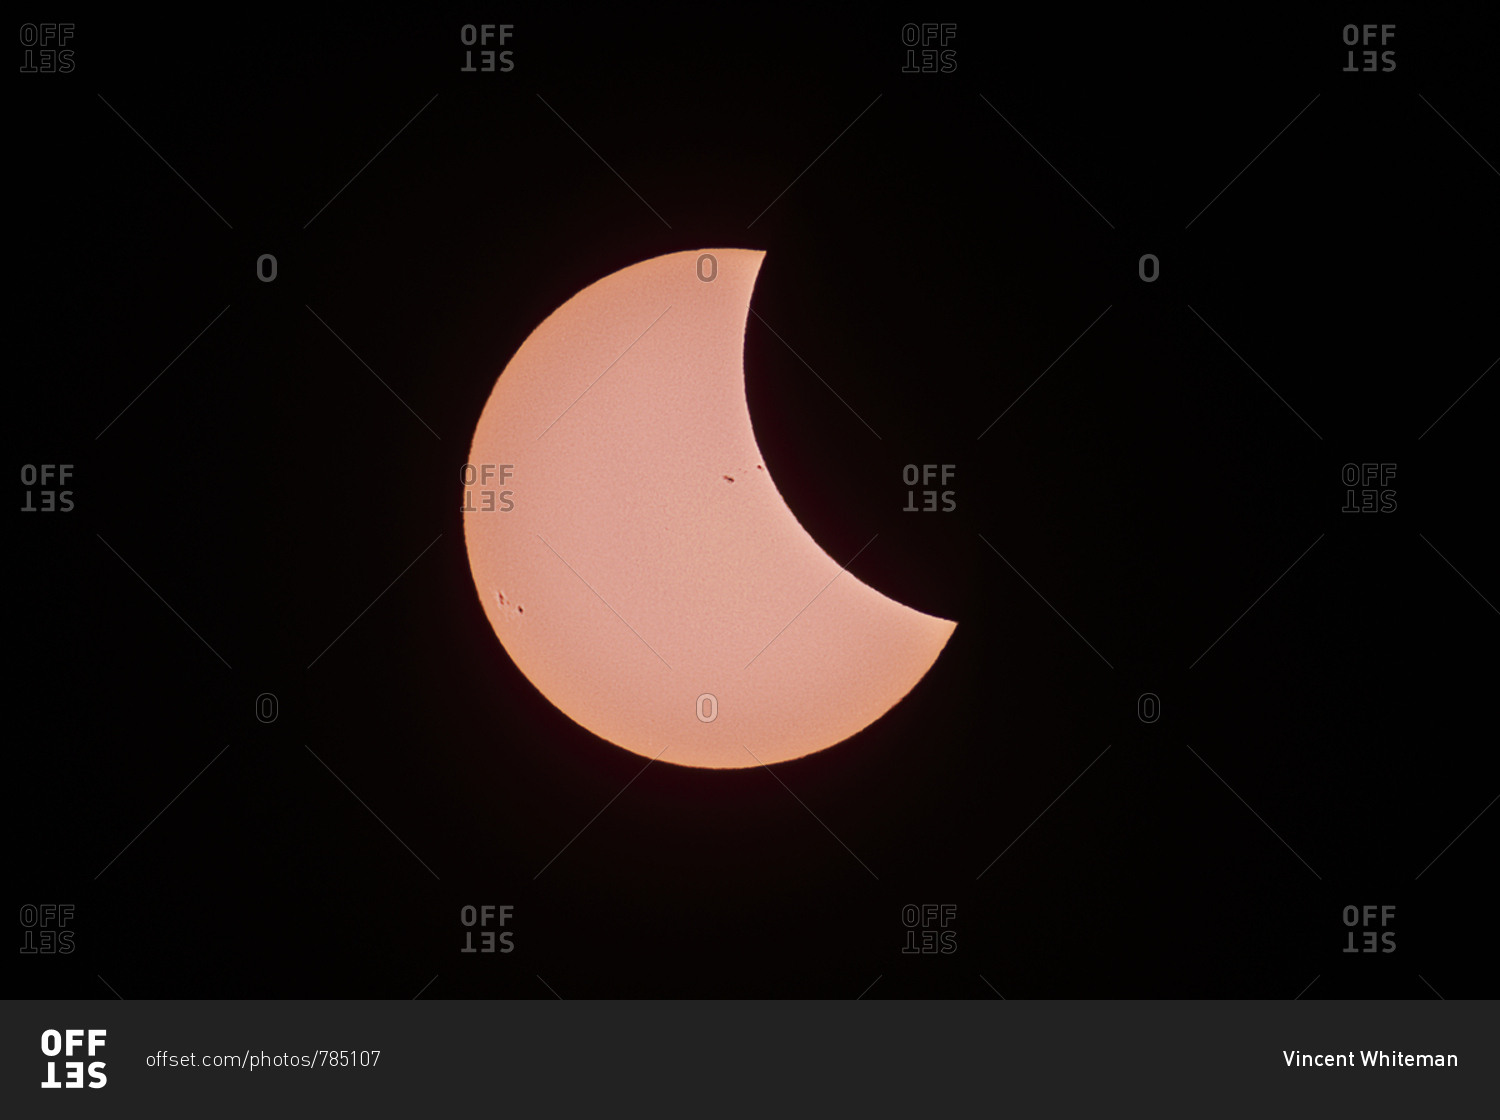 The Solar Eclipse shows off sunspots and granulation on the surface of the Sun (photosphere).